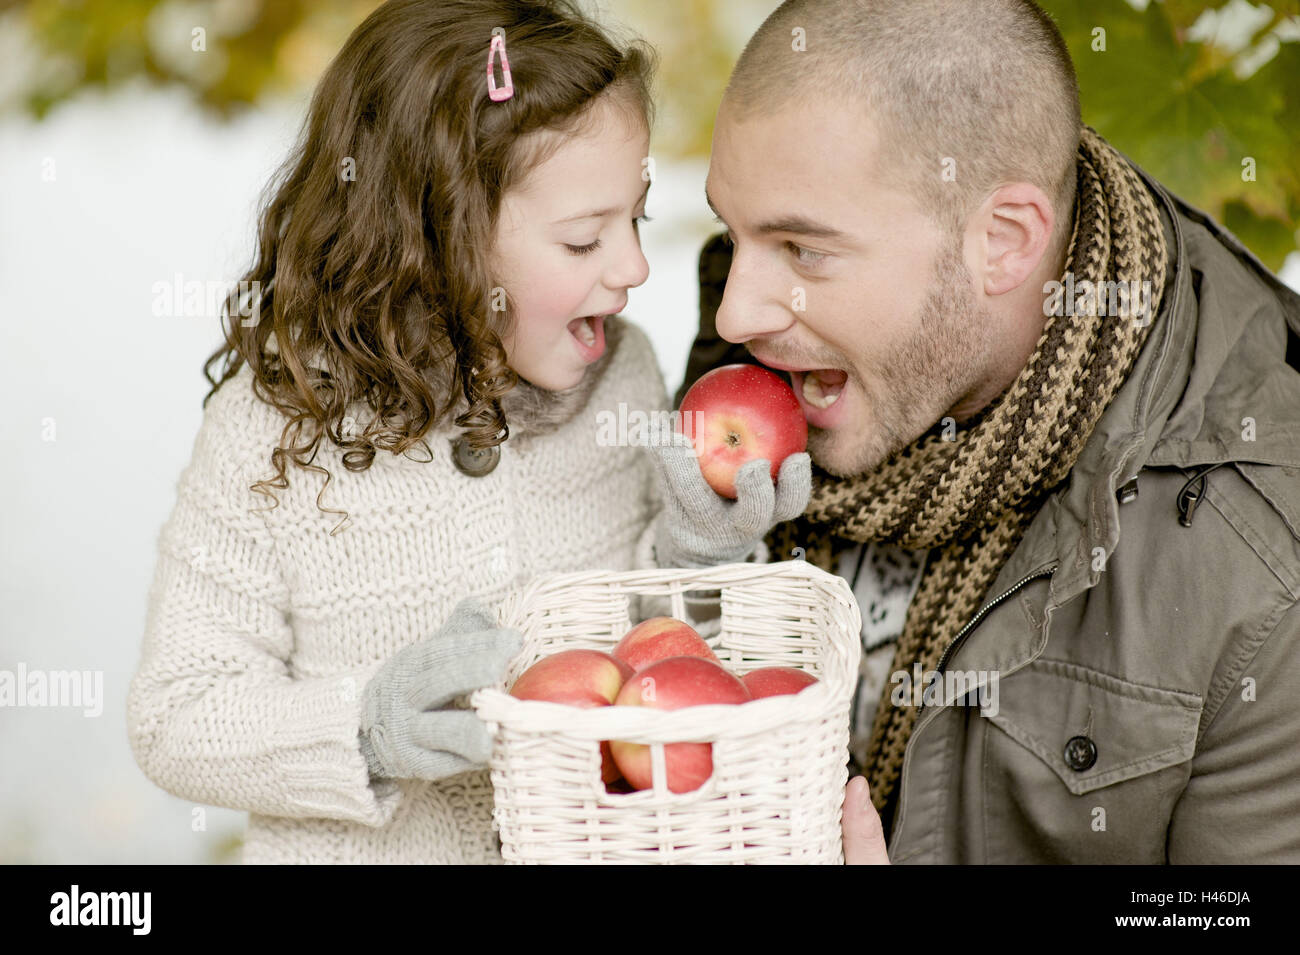 Father and subsidiary with apples, Stock Photo